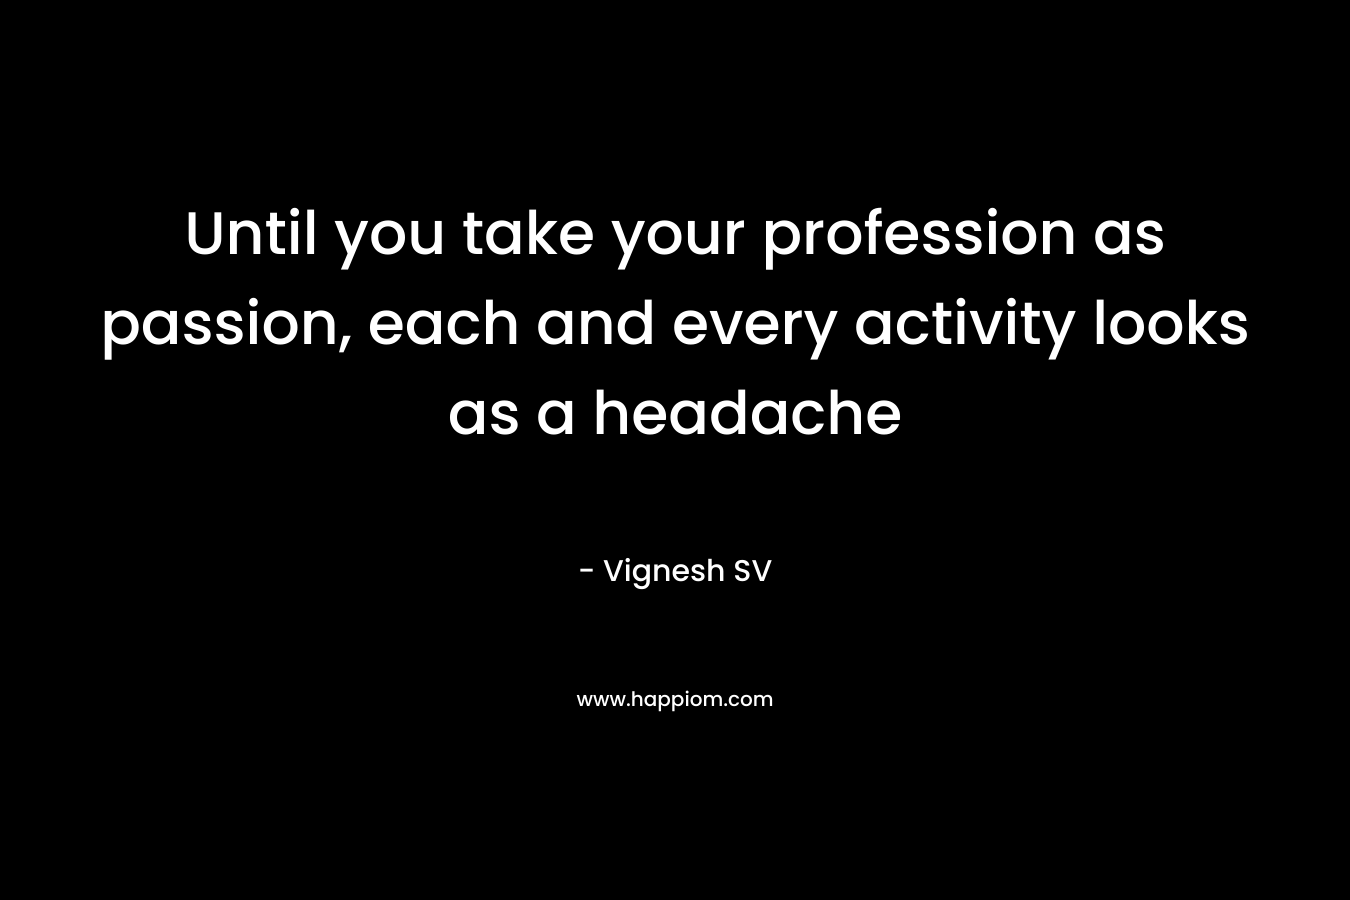 Until you take your profession as passion, each and every activity looks as a headache – Vignesh SV